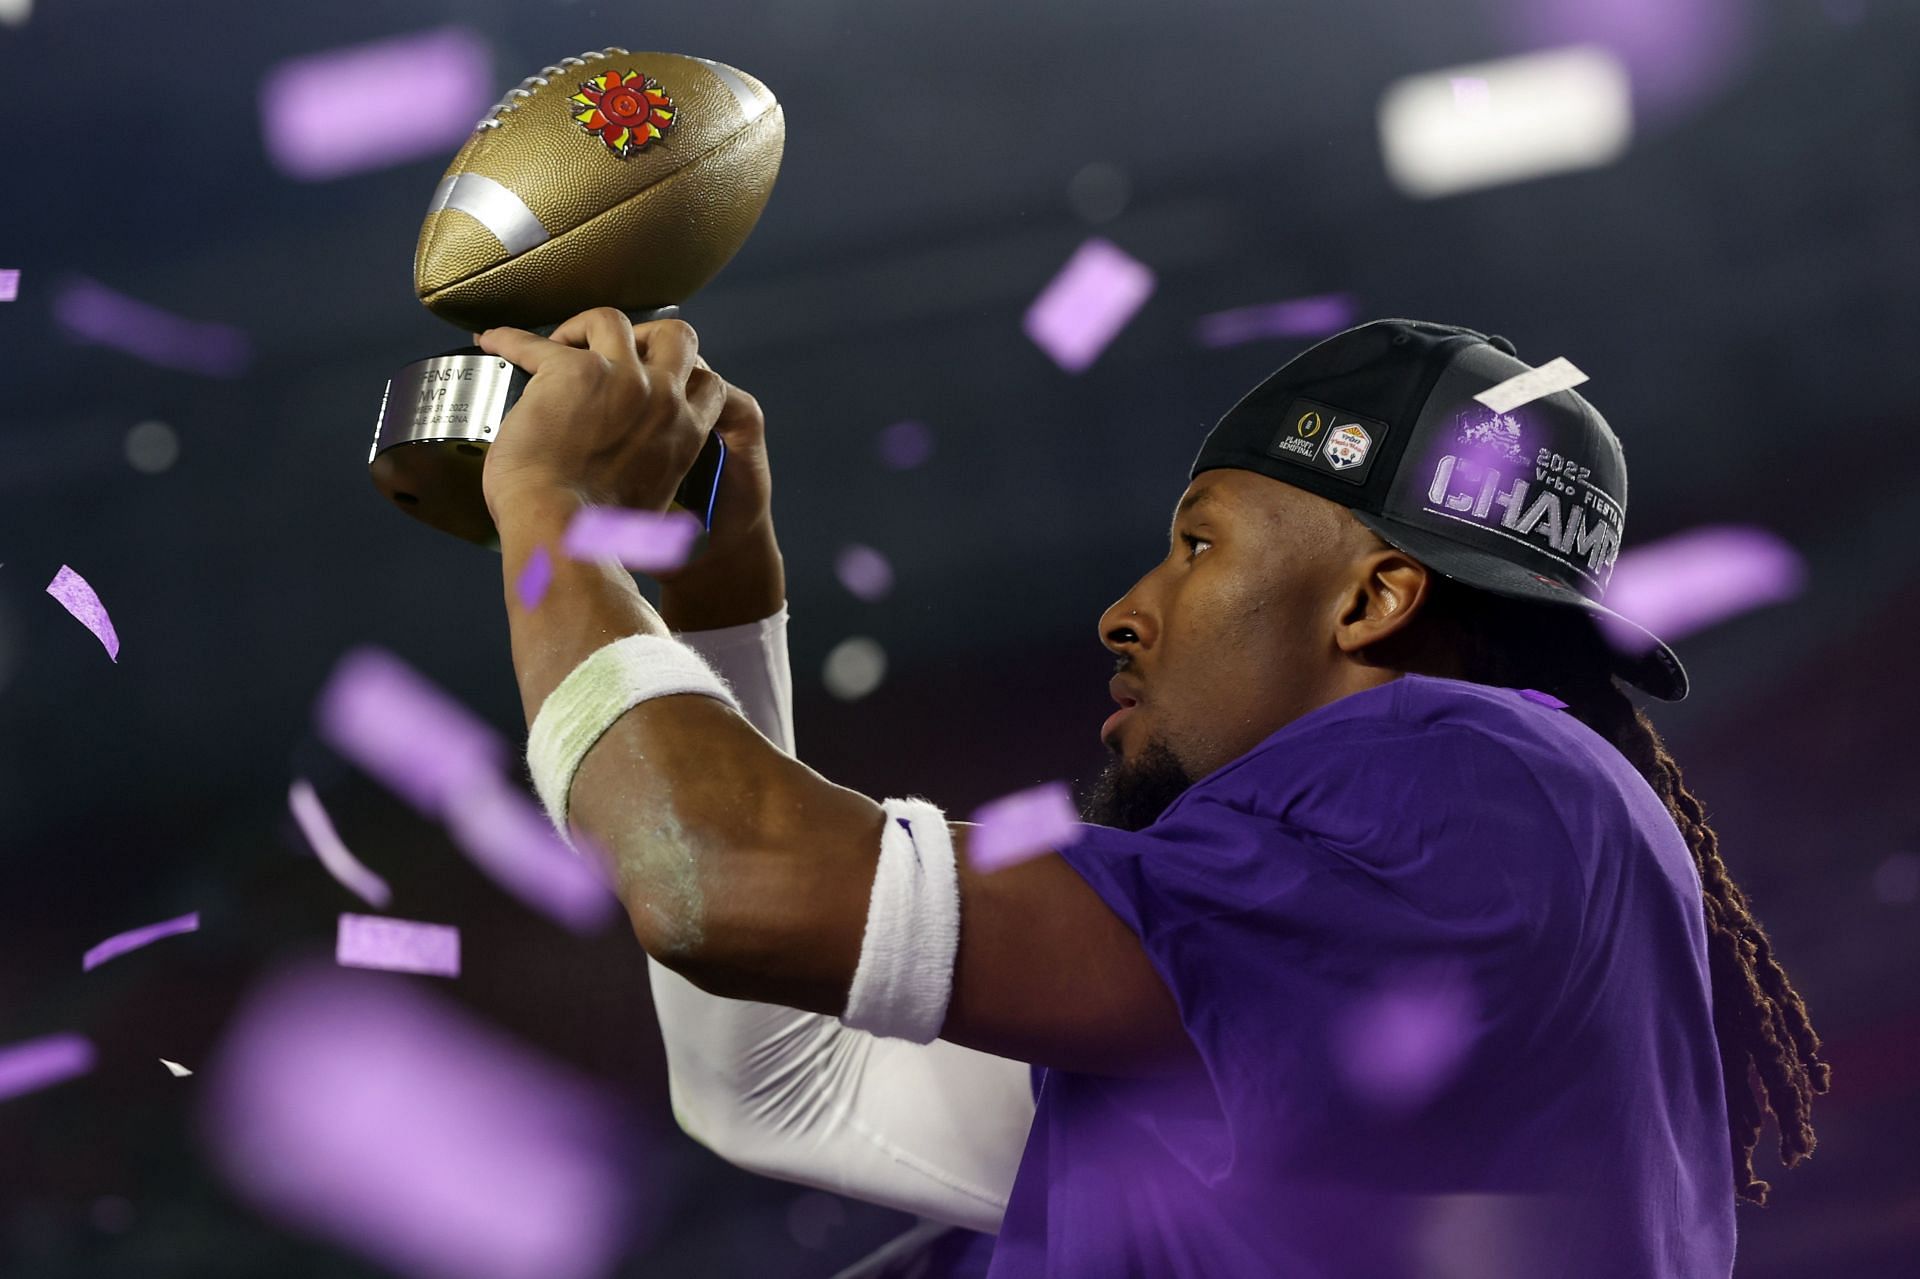 Why TCU WR Quentin Johnston should be the Detroit Lions' pick at